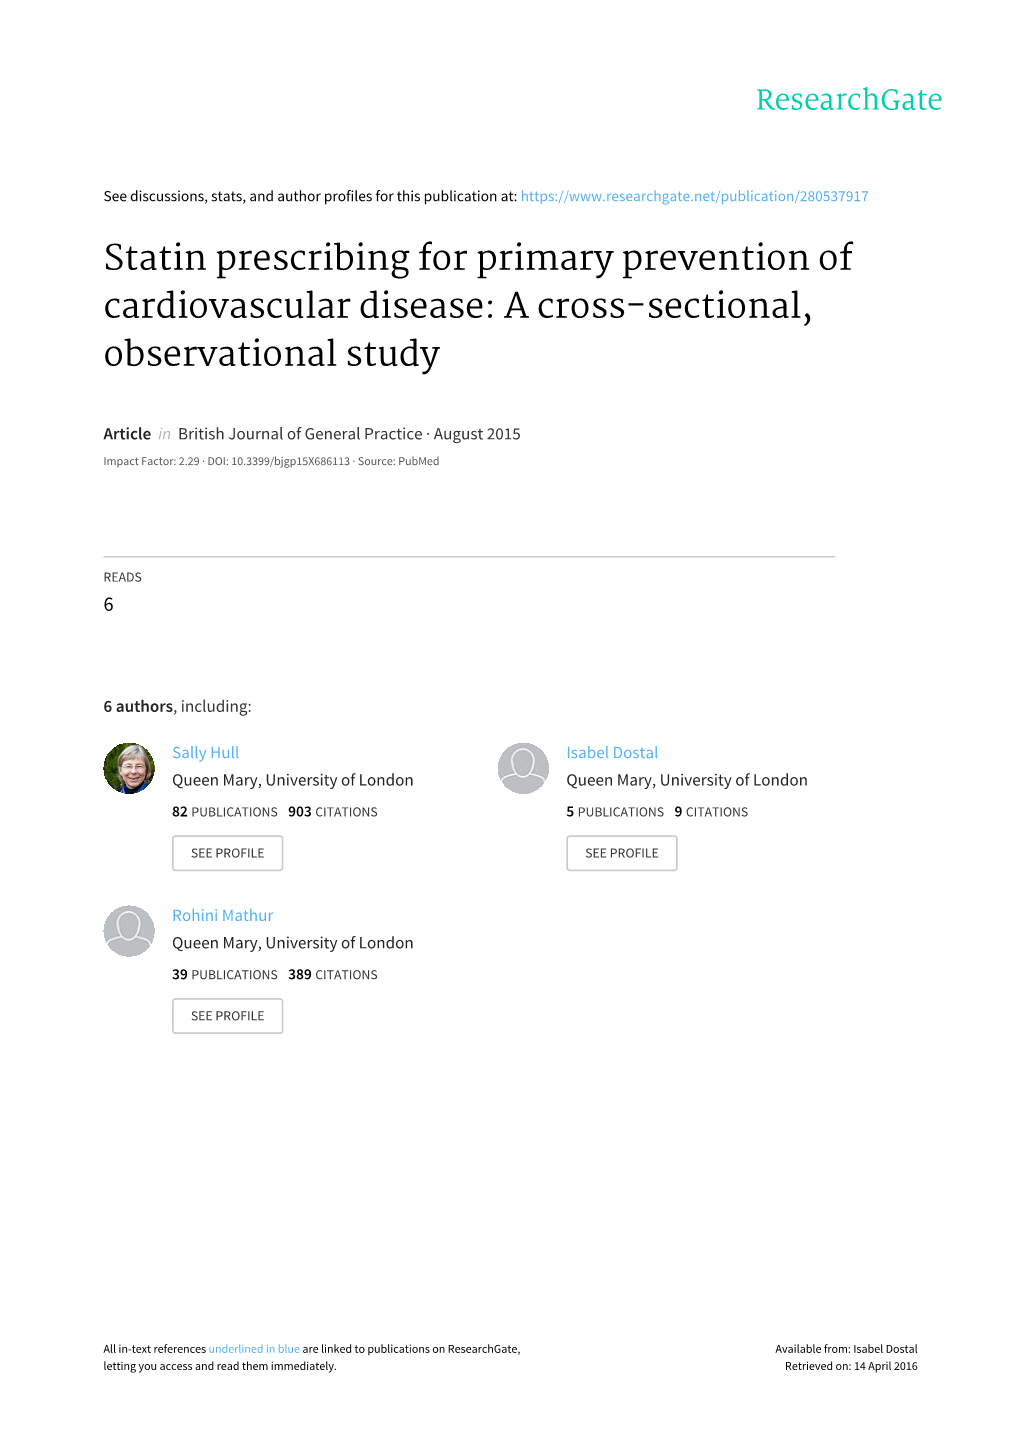 Statin Prescribing for Primary Prevention of Cardiovascular Disease: a Cross-Sectional, Observational Study